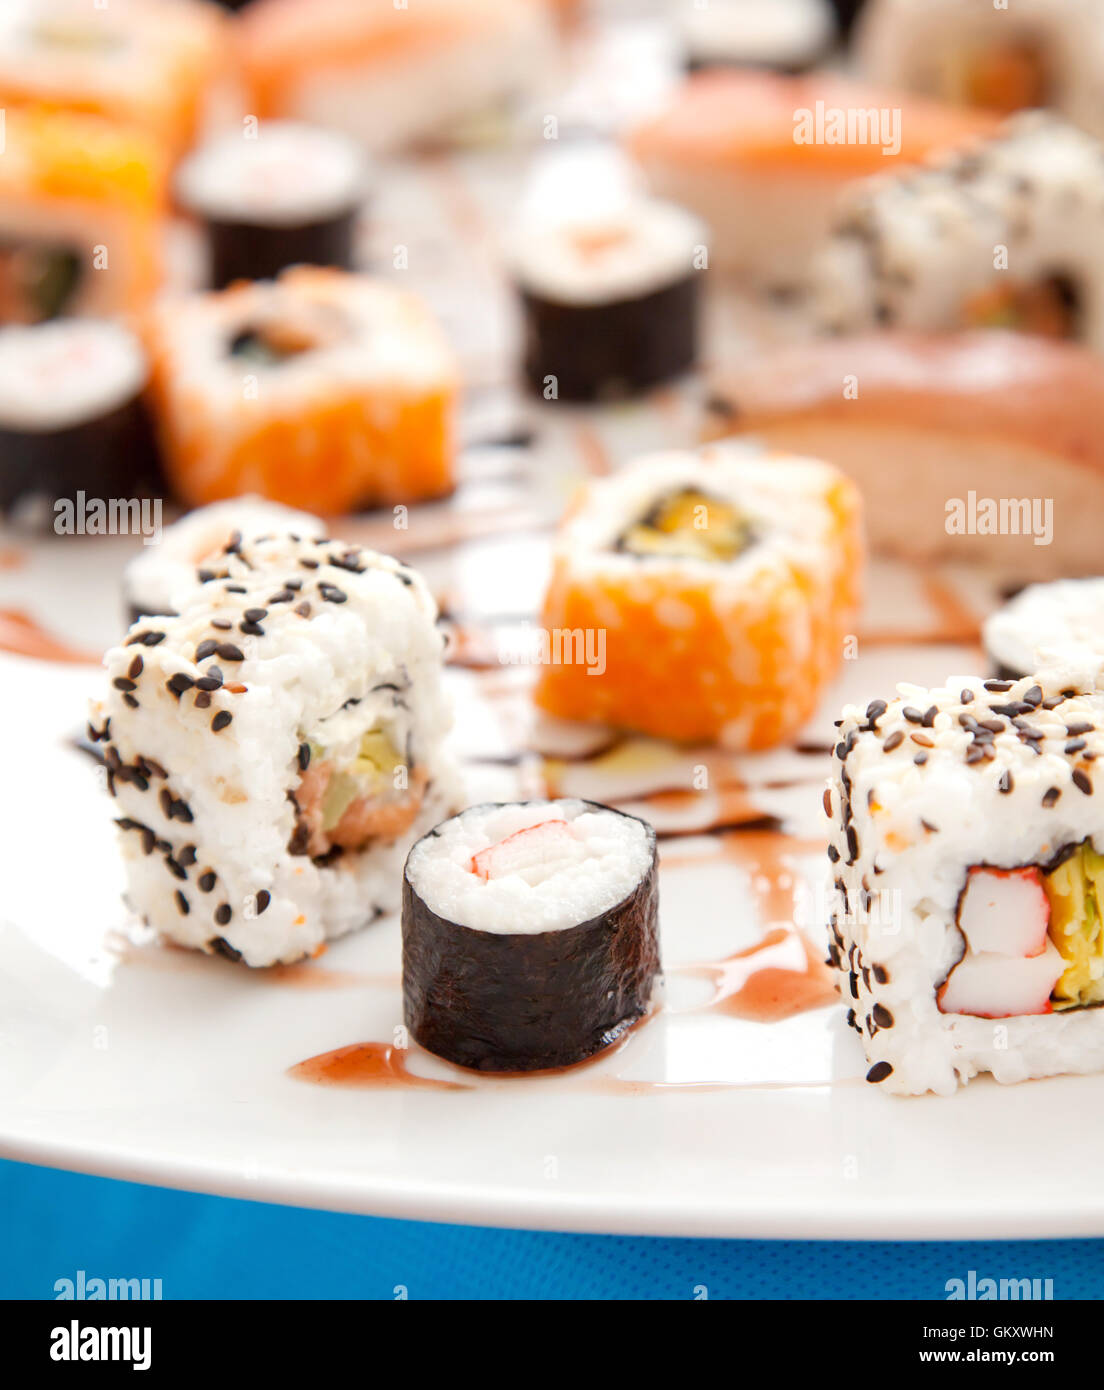 Sushi Buffet, different specialties of Japanese cuisine. Stock Photo